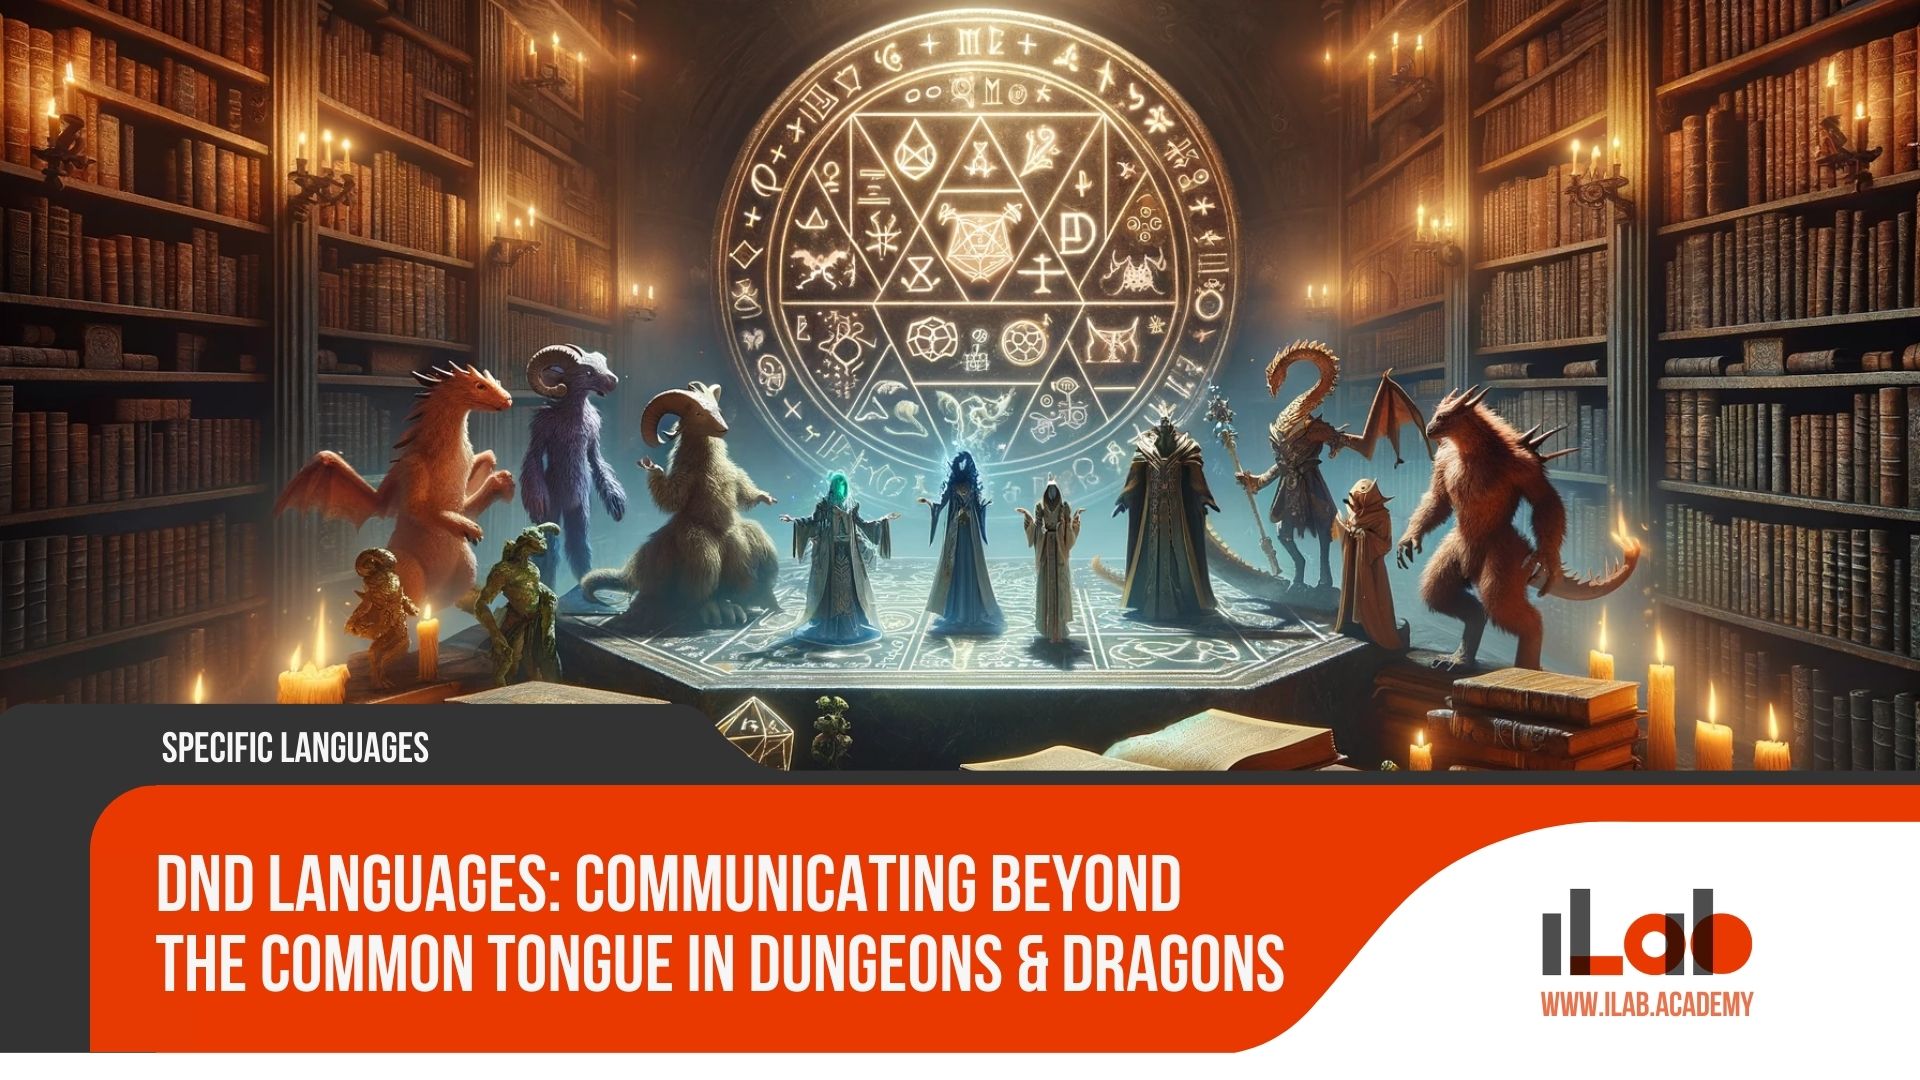 DnD Languages: Communicating Beyond the Common Tongue in Dungeons & Dragons